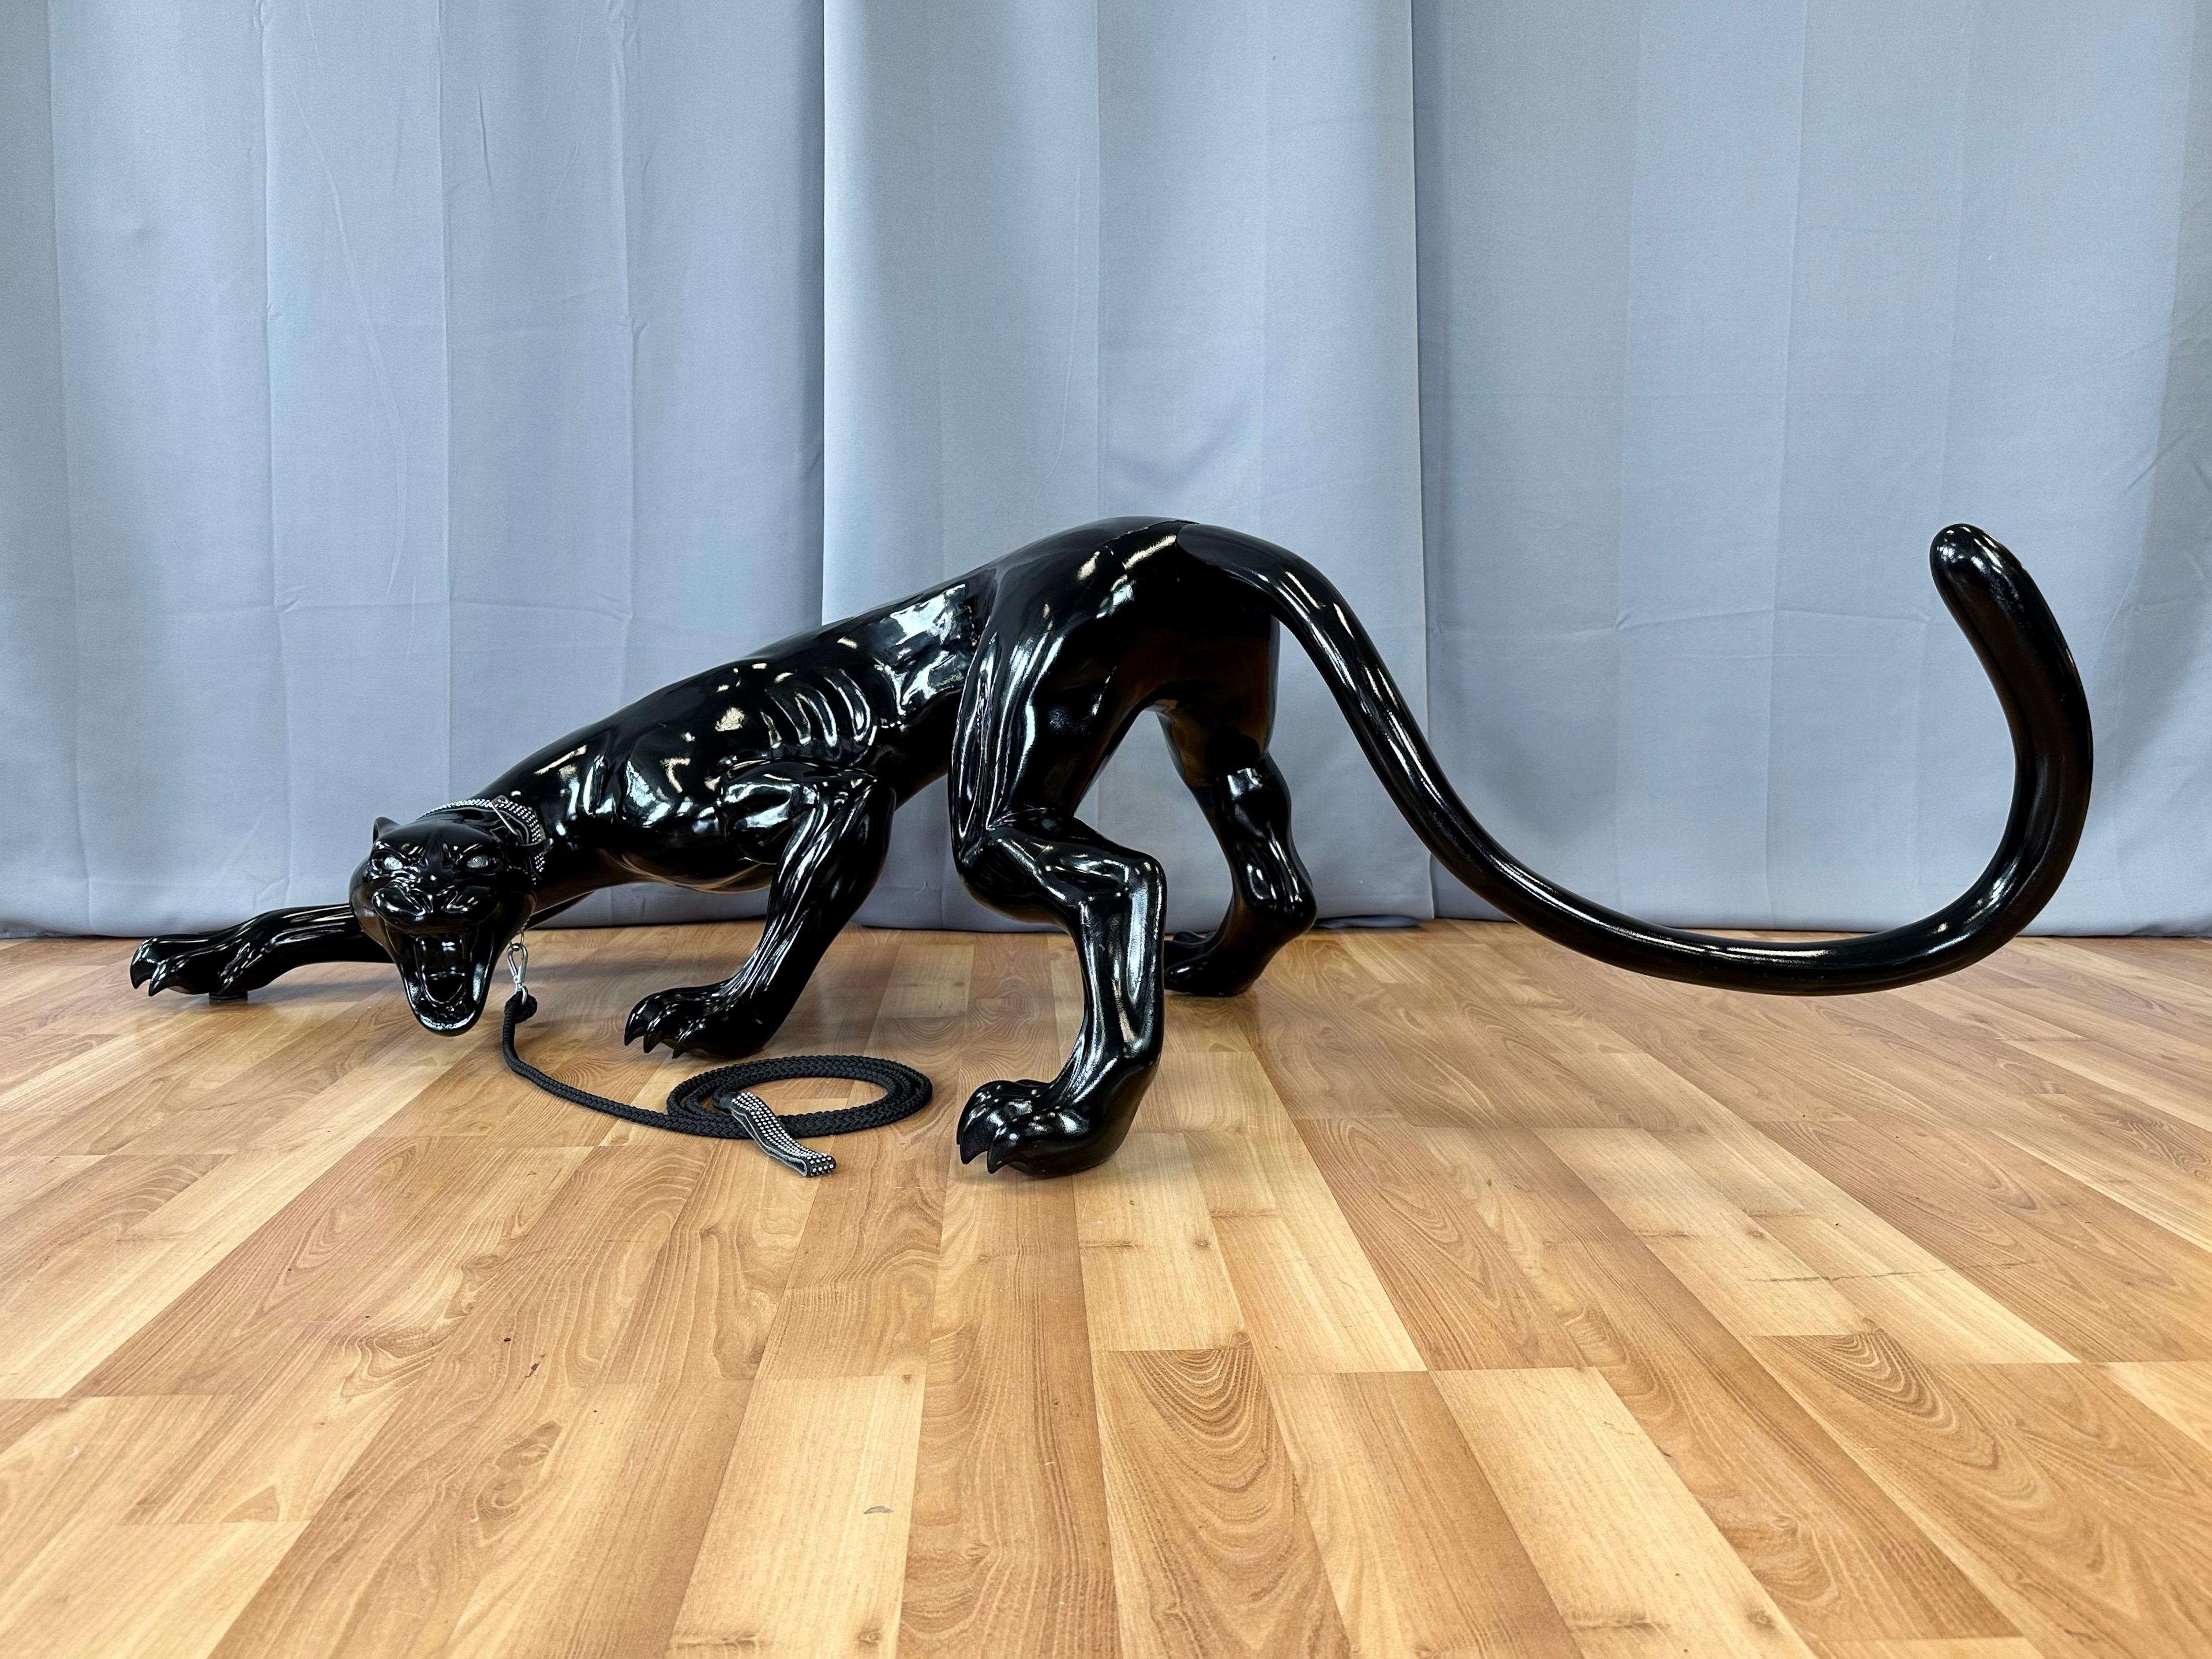 A magnificent and rare circa 2005 life-size black panther sculpture in fiberglass. Attributed to be a custom made display piece for the Gucci flagship store in San Francisco, California.

Lean, mean, and poised to make a scene, this head-turning